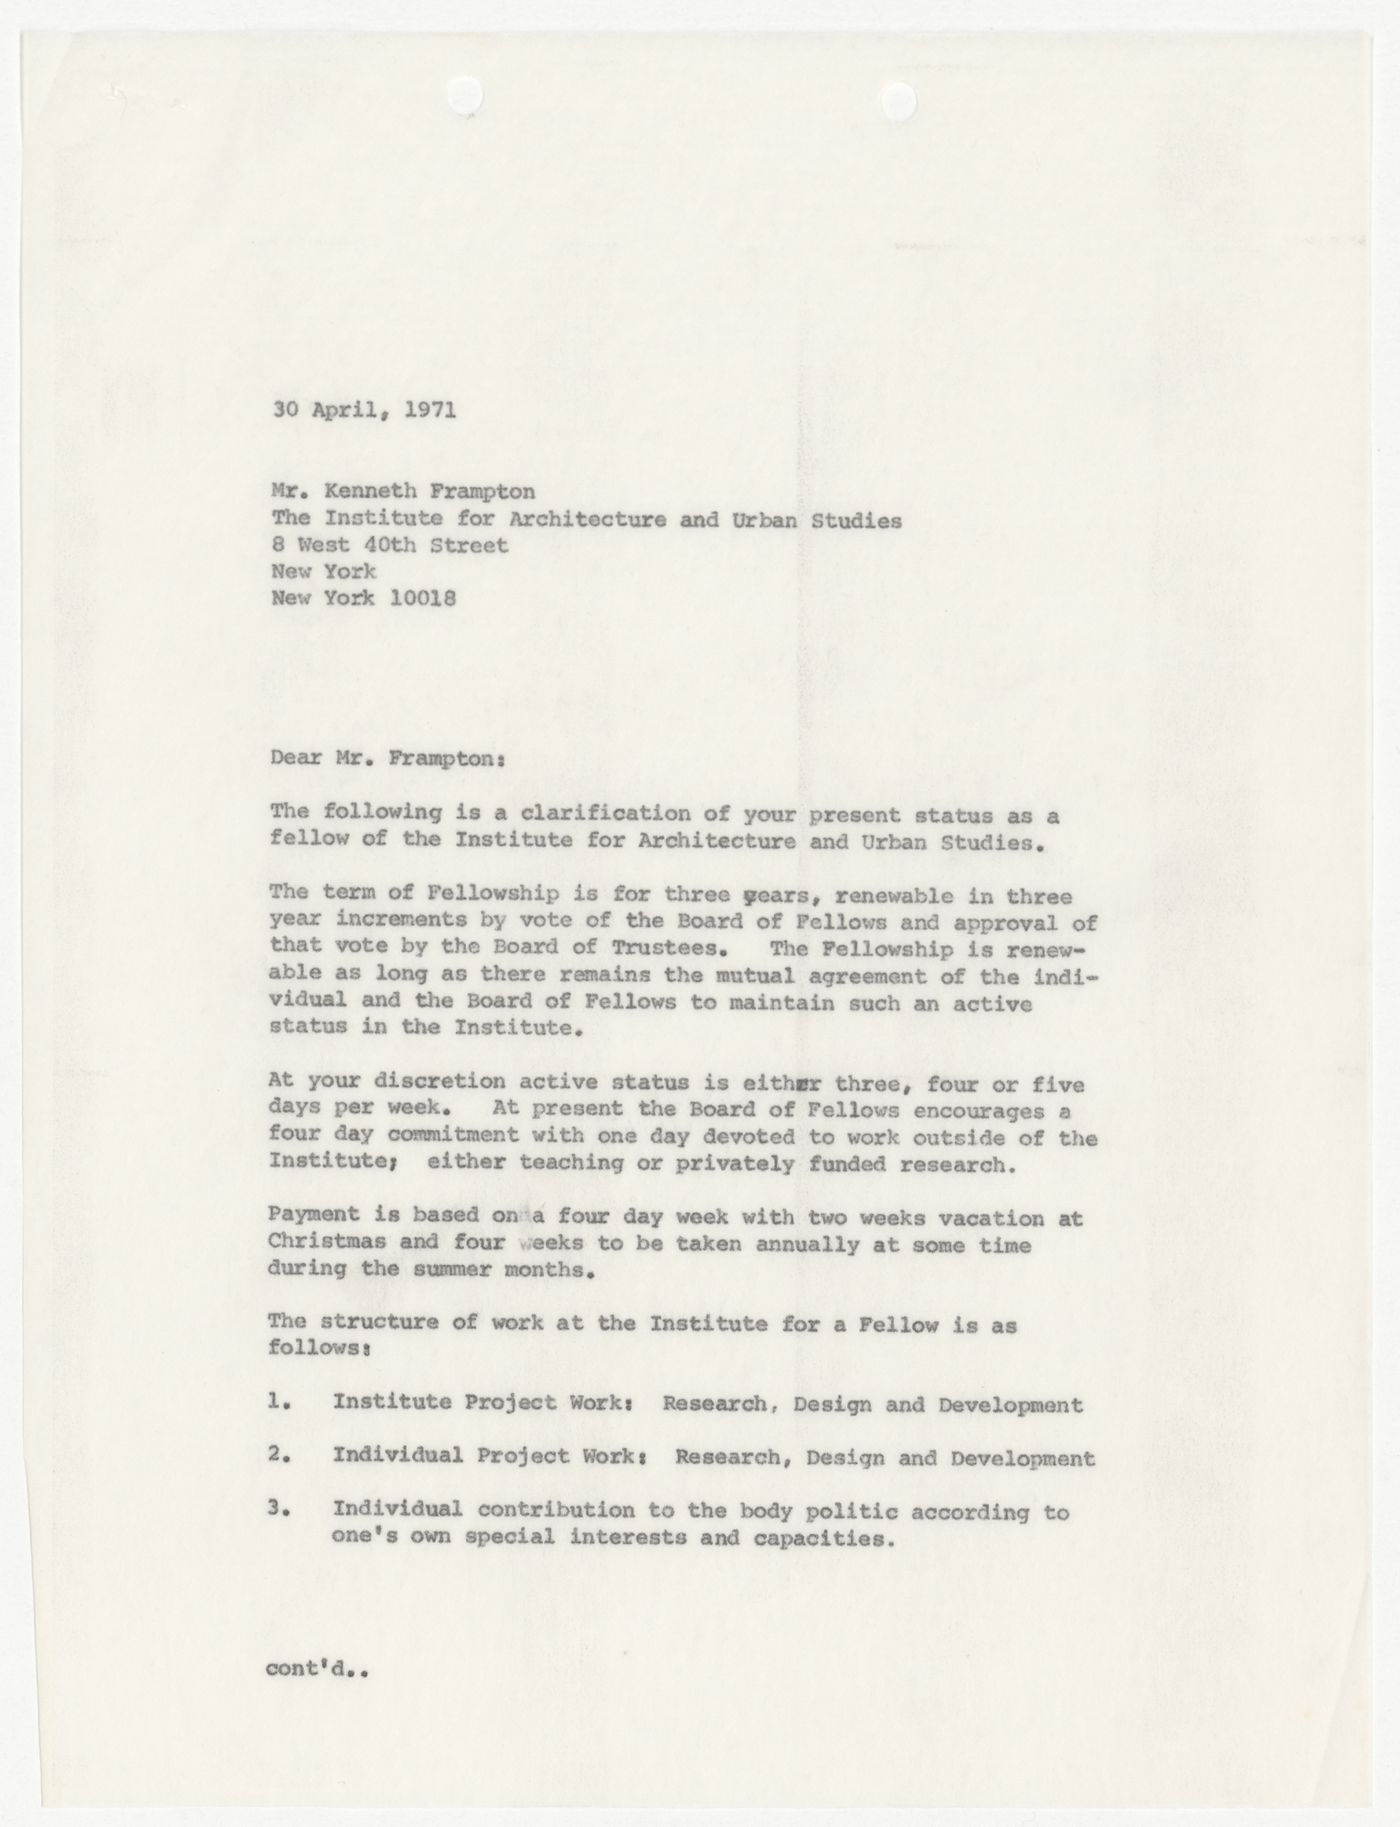 Letter from Peter D. Eisenman to Kenneth Frampton about Frampton's role as a Fellow